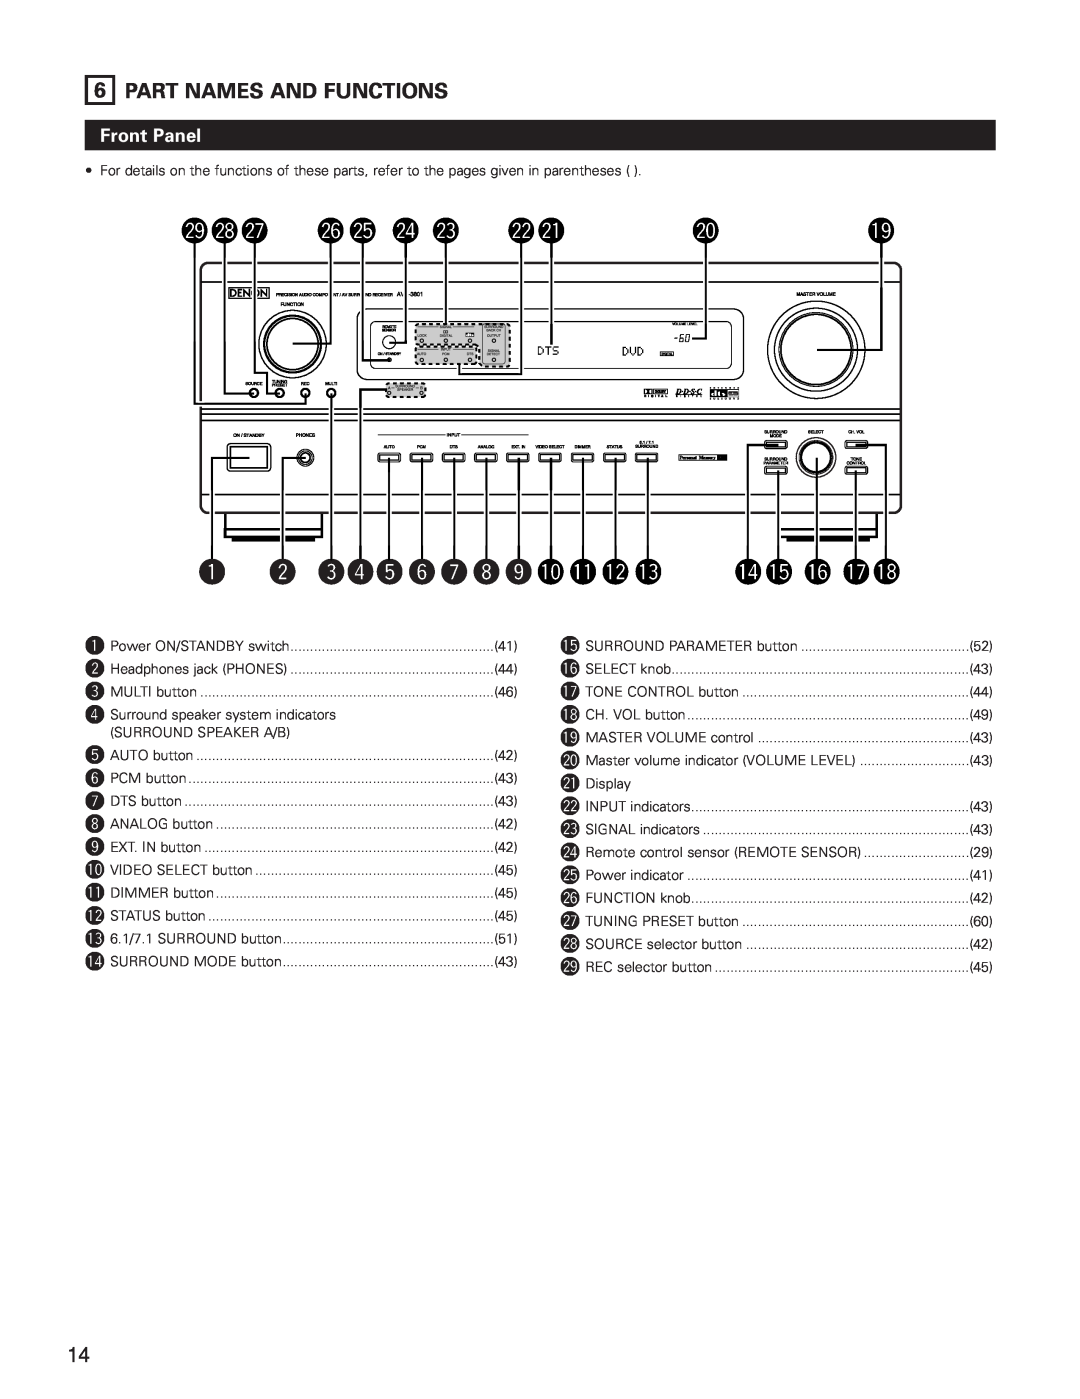 Denon AVR-3801 manual Part Names And Functions, Front Panel 